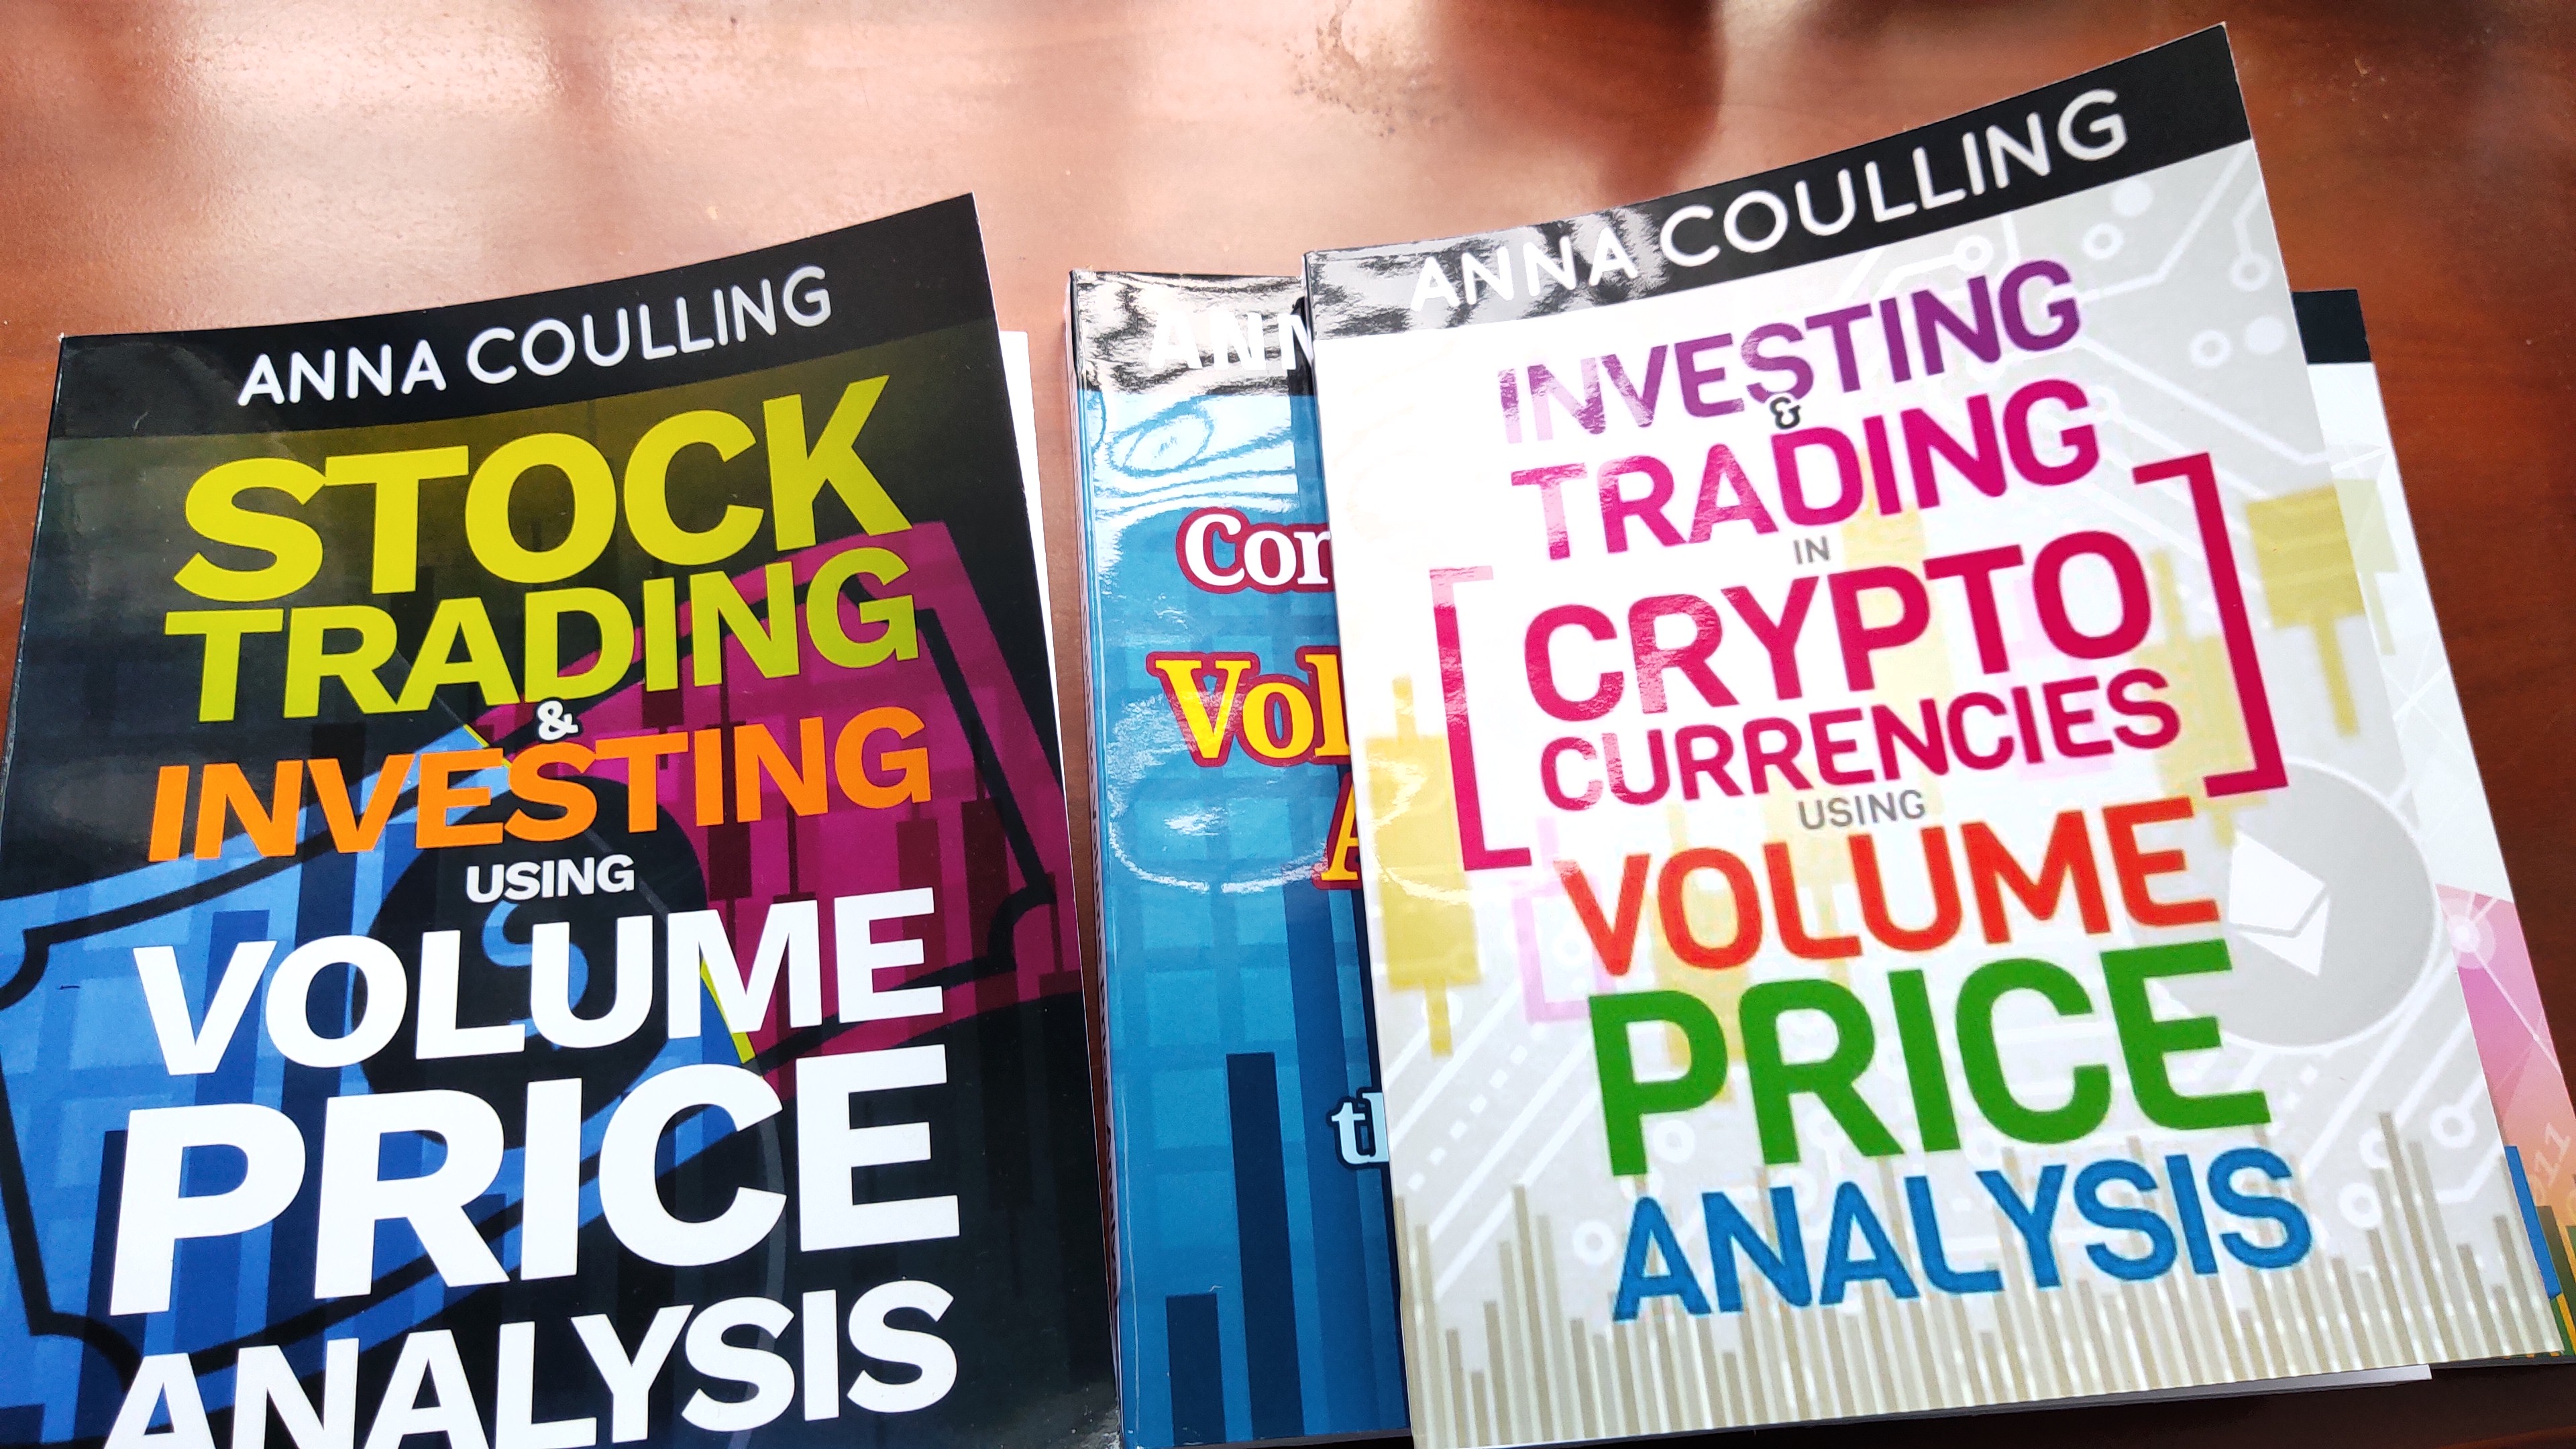 a complete guide to volume price analysis pdf download